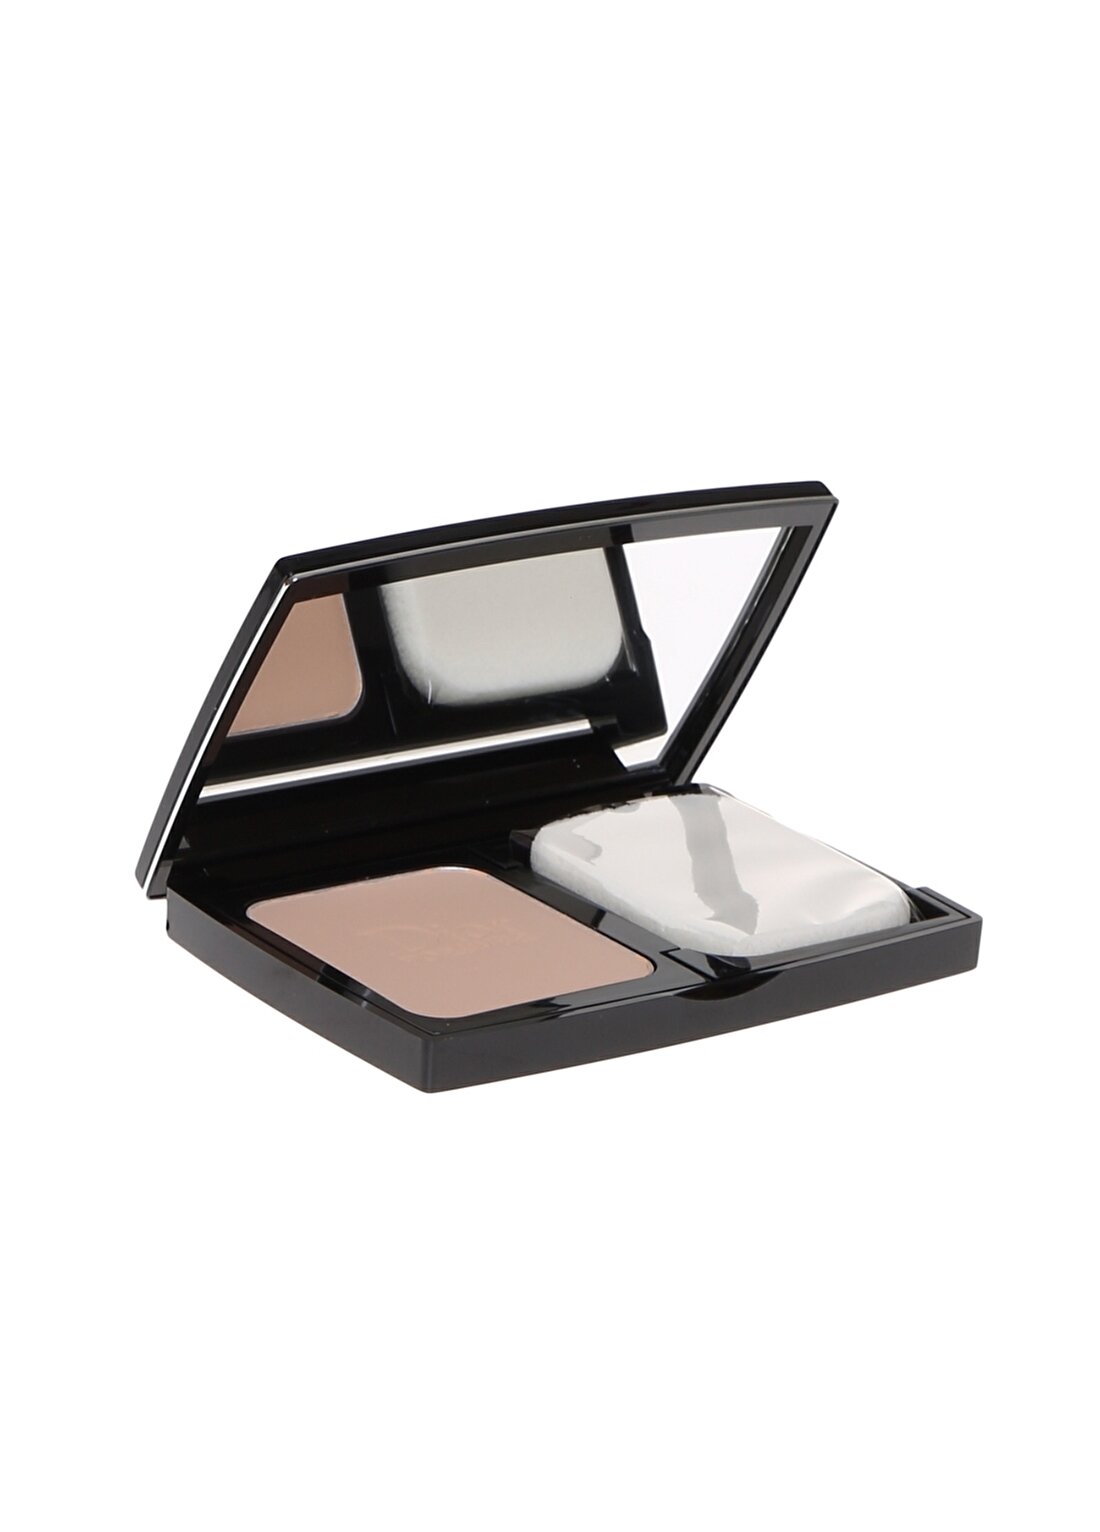 Dior Forever Extreme Control Compact Powder 025 Soft Beige Pudra